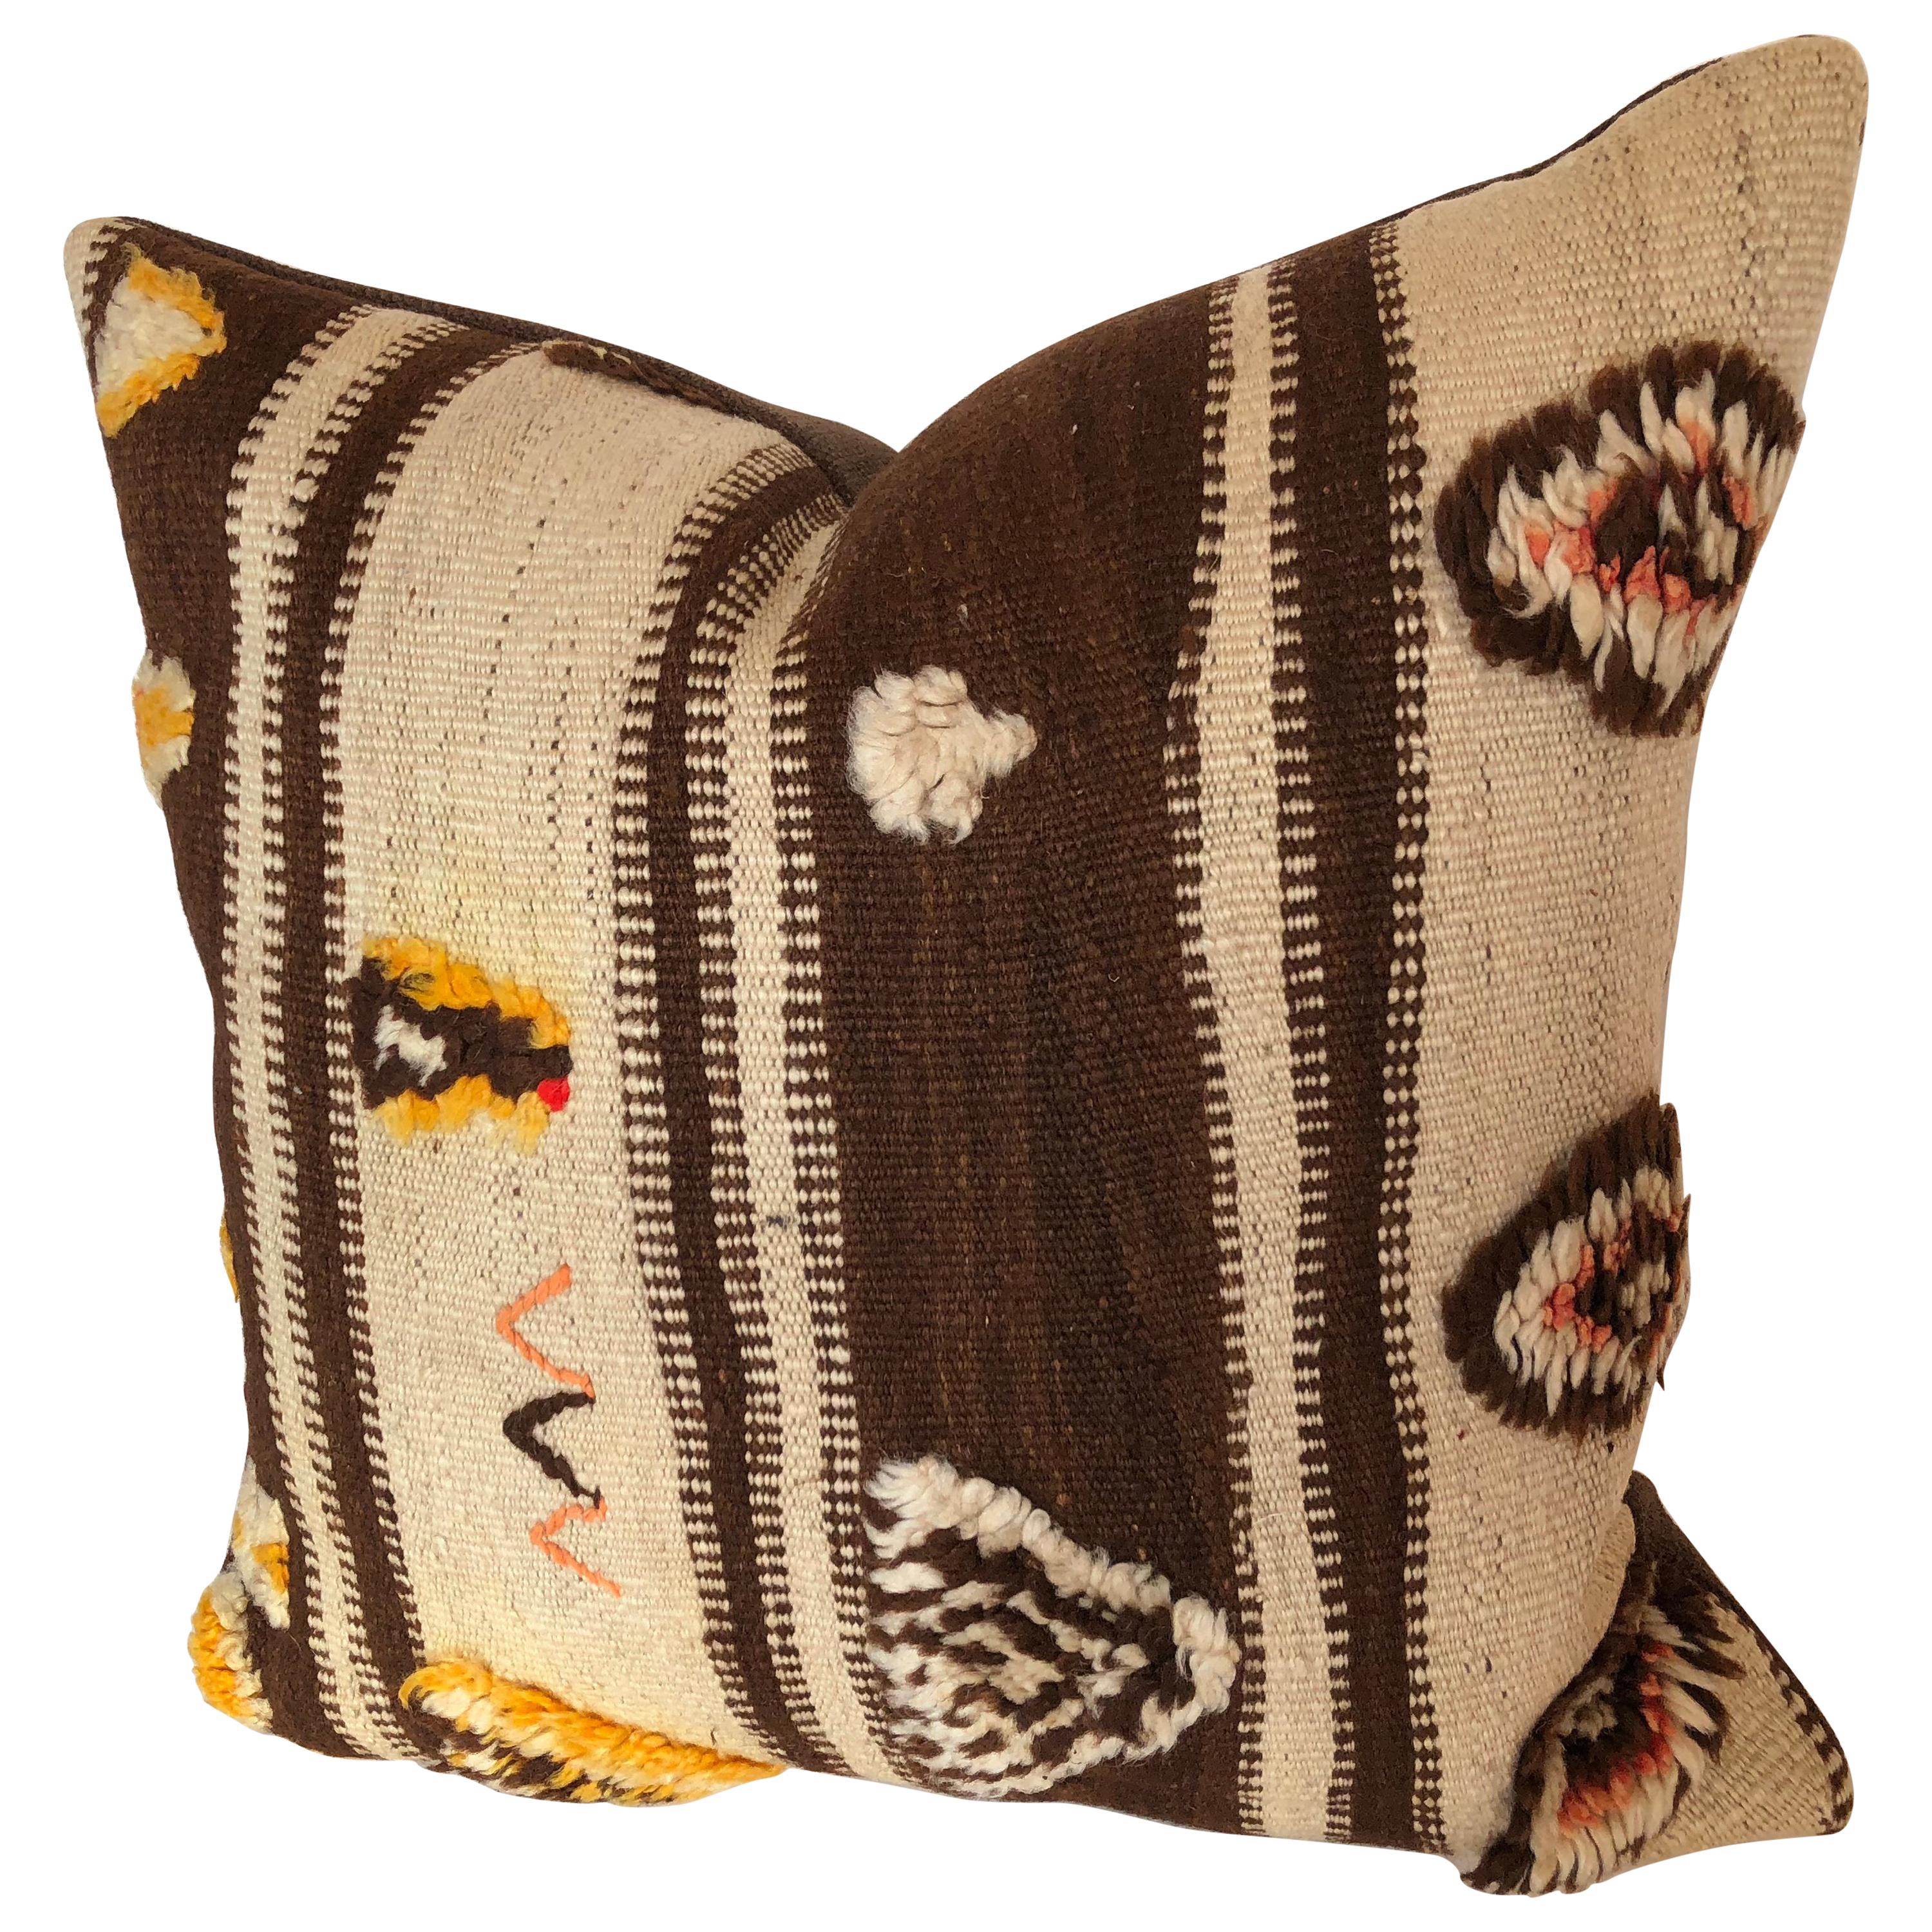 Custom Pillow by Maison Suzanne, Cut from a Vintage Wool Moroccan Berber Rug